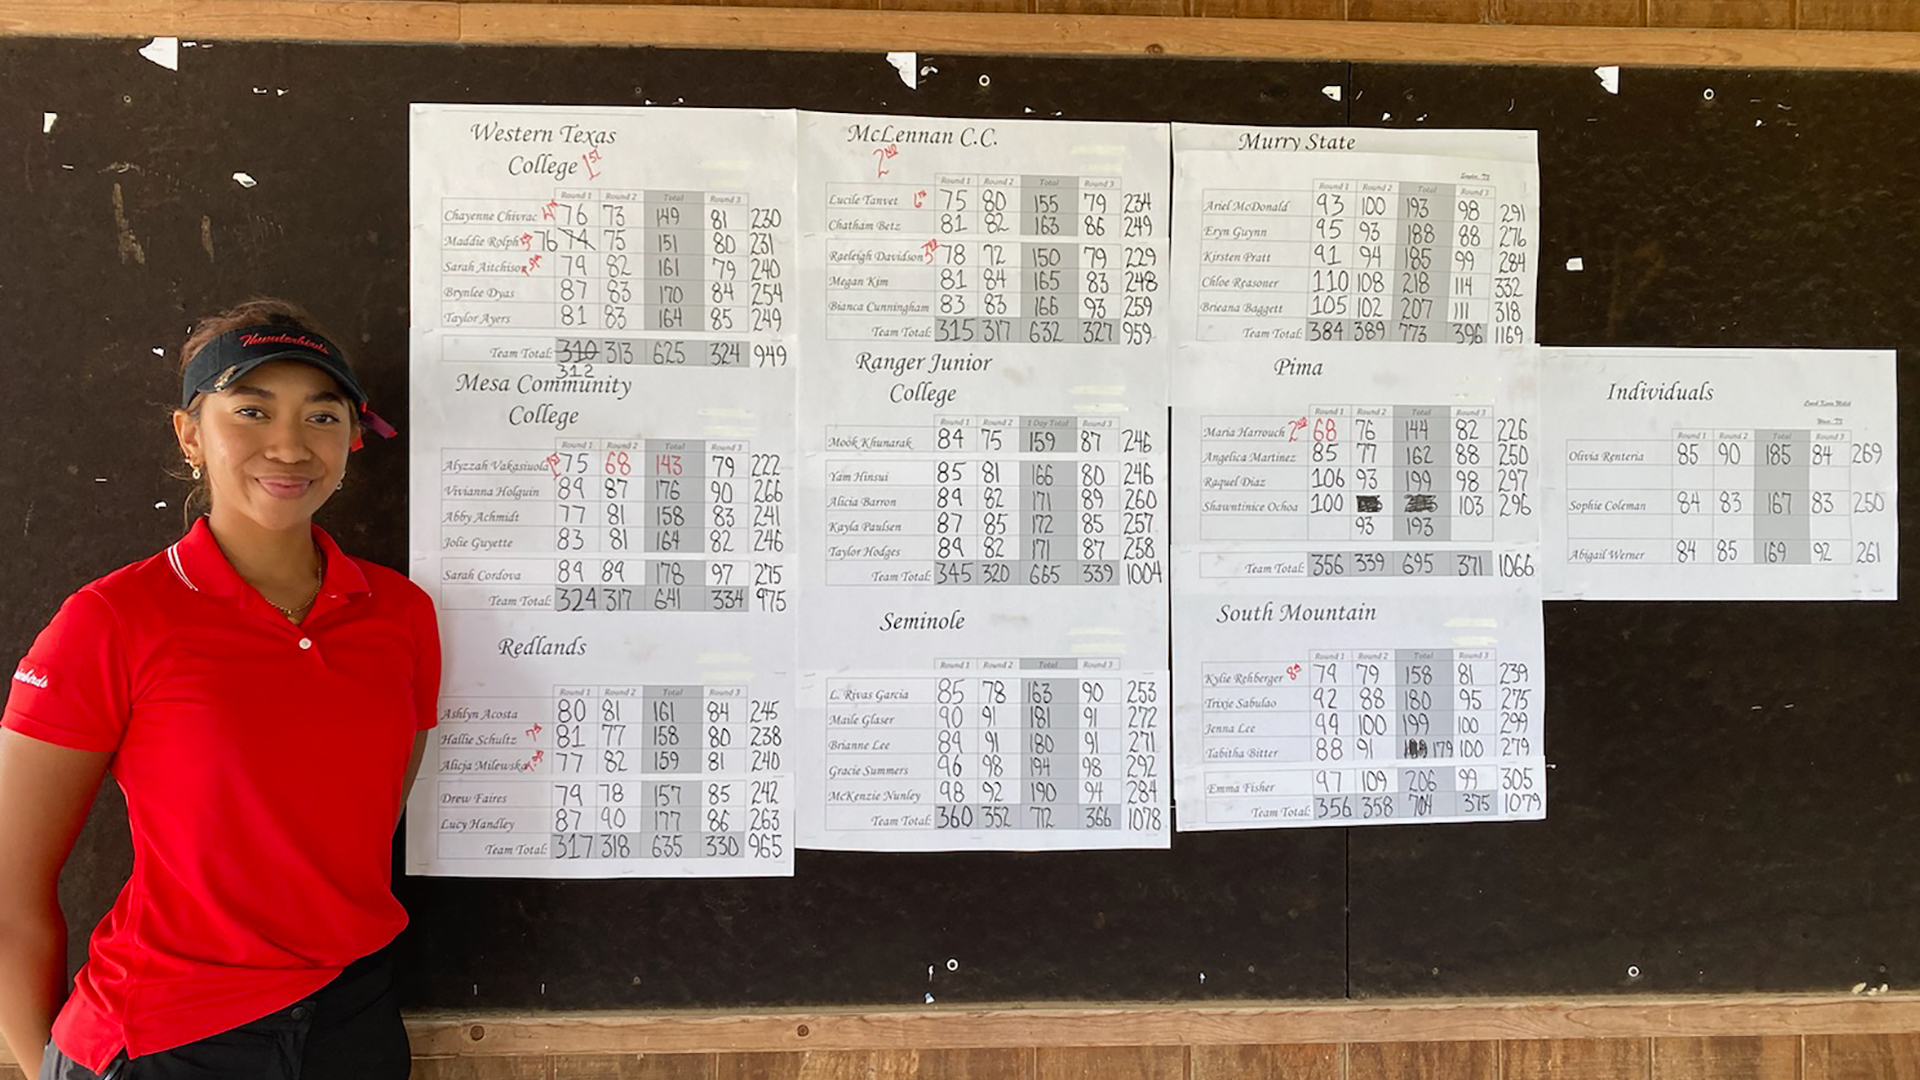 Vakasioula wins SW District women's golf title, team places fourth